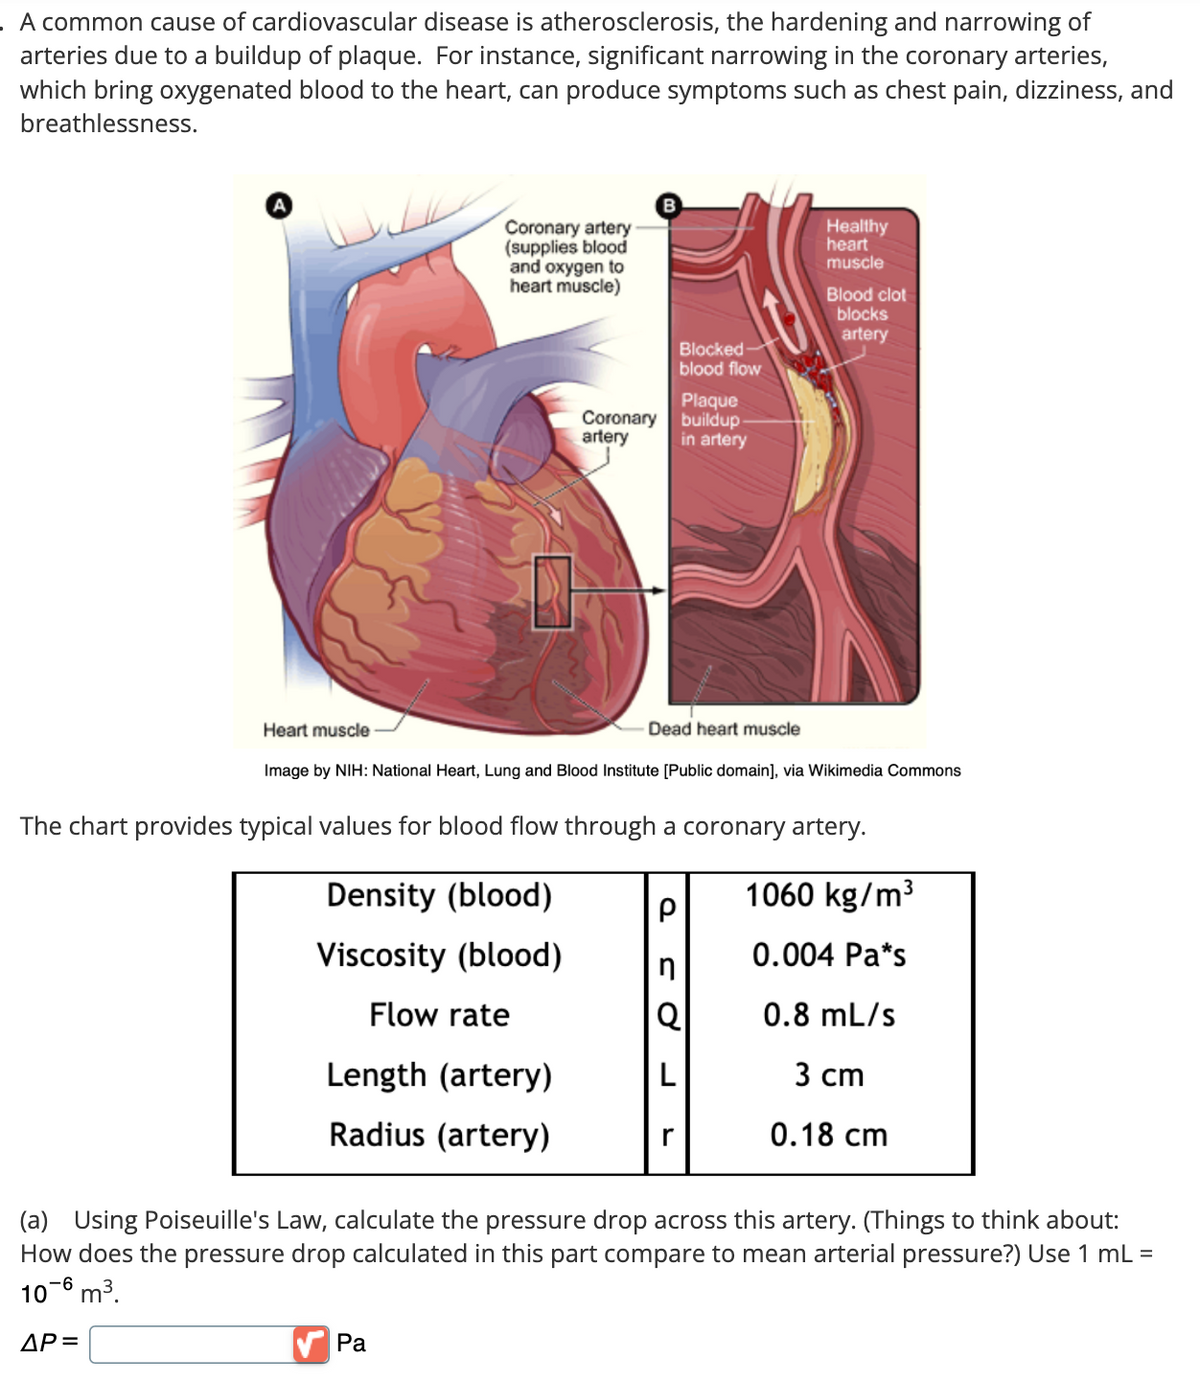 . A common cause of cardiovascular disease is atherosclerosis, the hardening and narrowing of
arteries due to a buildup of plaque. For instance, significant narrowing in the coronary arteries,
which bring oxygenated blood to the heart, can produce symptoms such as chest pain, dizziness, and
breathlessness.
A
Heart muscle
B
Coronary artery
(supplies blood
and oxygen to
heart muscle)
Healthy
heart
muscle
Blood clot
blocks
artery
Blocked-
blood flow
Plaque
Coronary
artery
buildup.
in artery
Dead heart muscle
Image by NIH: National Heart, Lung and Blood Institute [Public domain], via Wikimedia Commons
The chart provides typical values for blood flow through a coronary artery.
Density (blood)
1060 kg/m³
ρ
Viscosity (blood)
0.004 Pa*s
n
Flow rate
0.8 mL/s
Length (artery)
3 cm
Radius (artery)
r
0.18 cm
(a) Using Poiseuille's Law, calculate the pressure drop across this artery. (Things to think about:
How does the pressure drop calculated in this part compare to mean arterial pressure?) Use 1 mL =
10-6 m³.
AP=
Pa